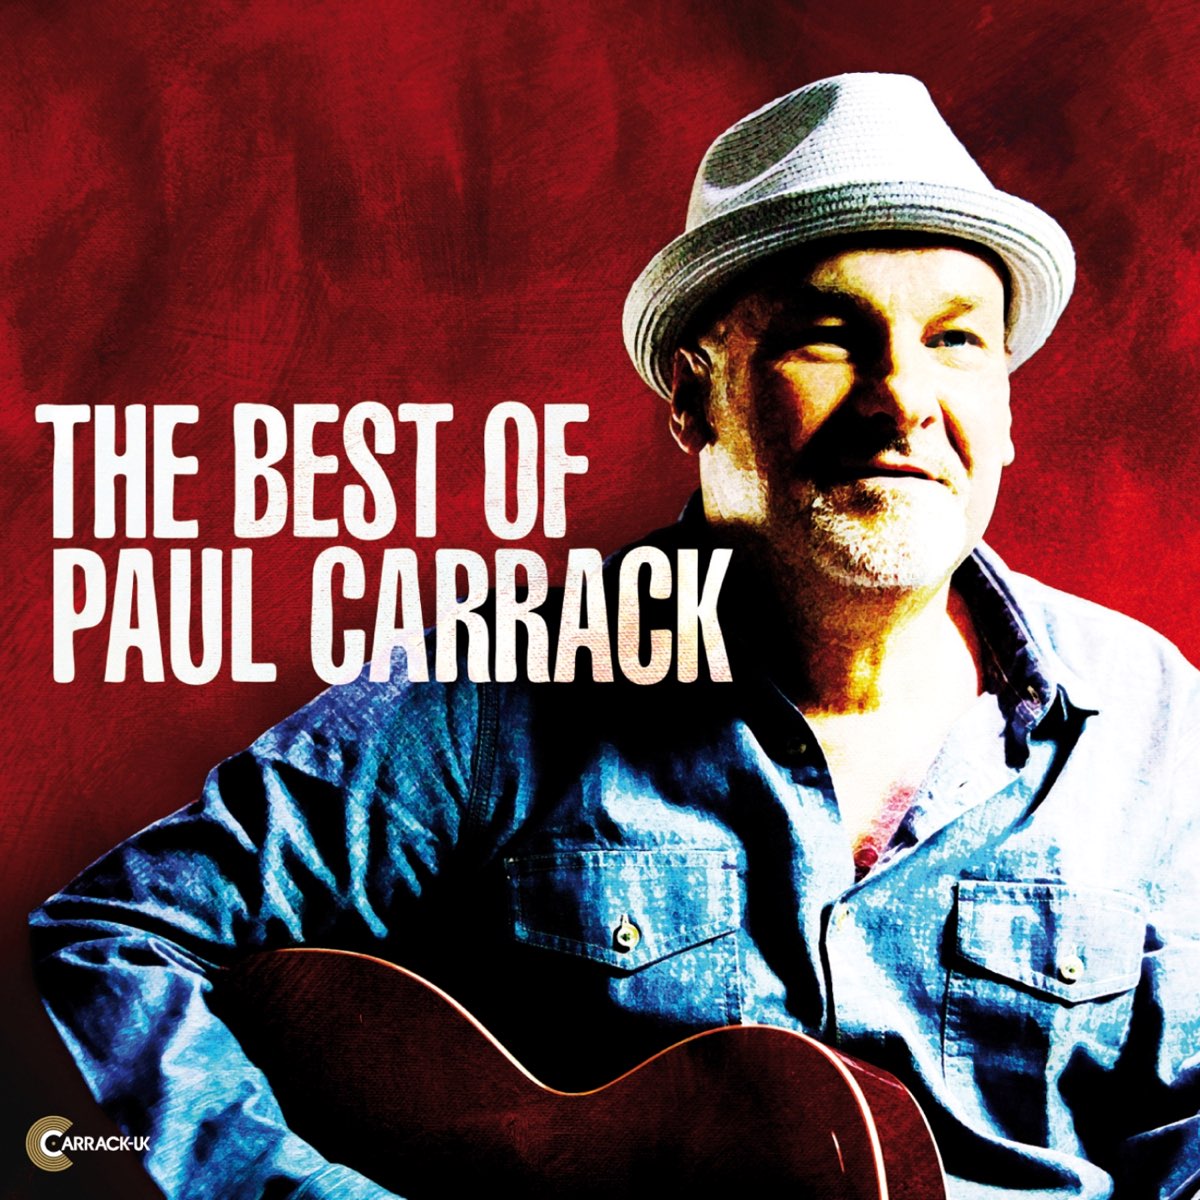 ‎The Best of Paul Carrack by Paul Carrack on Apple Music